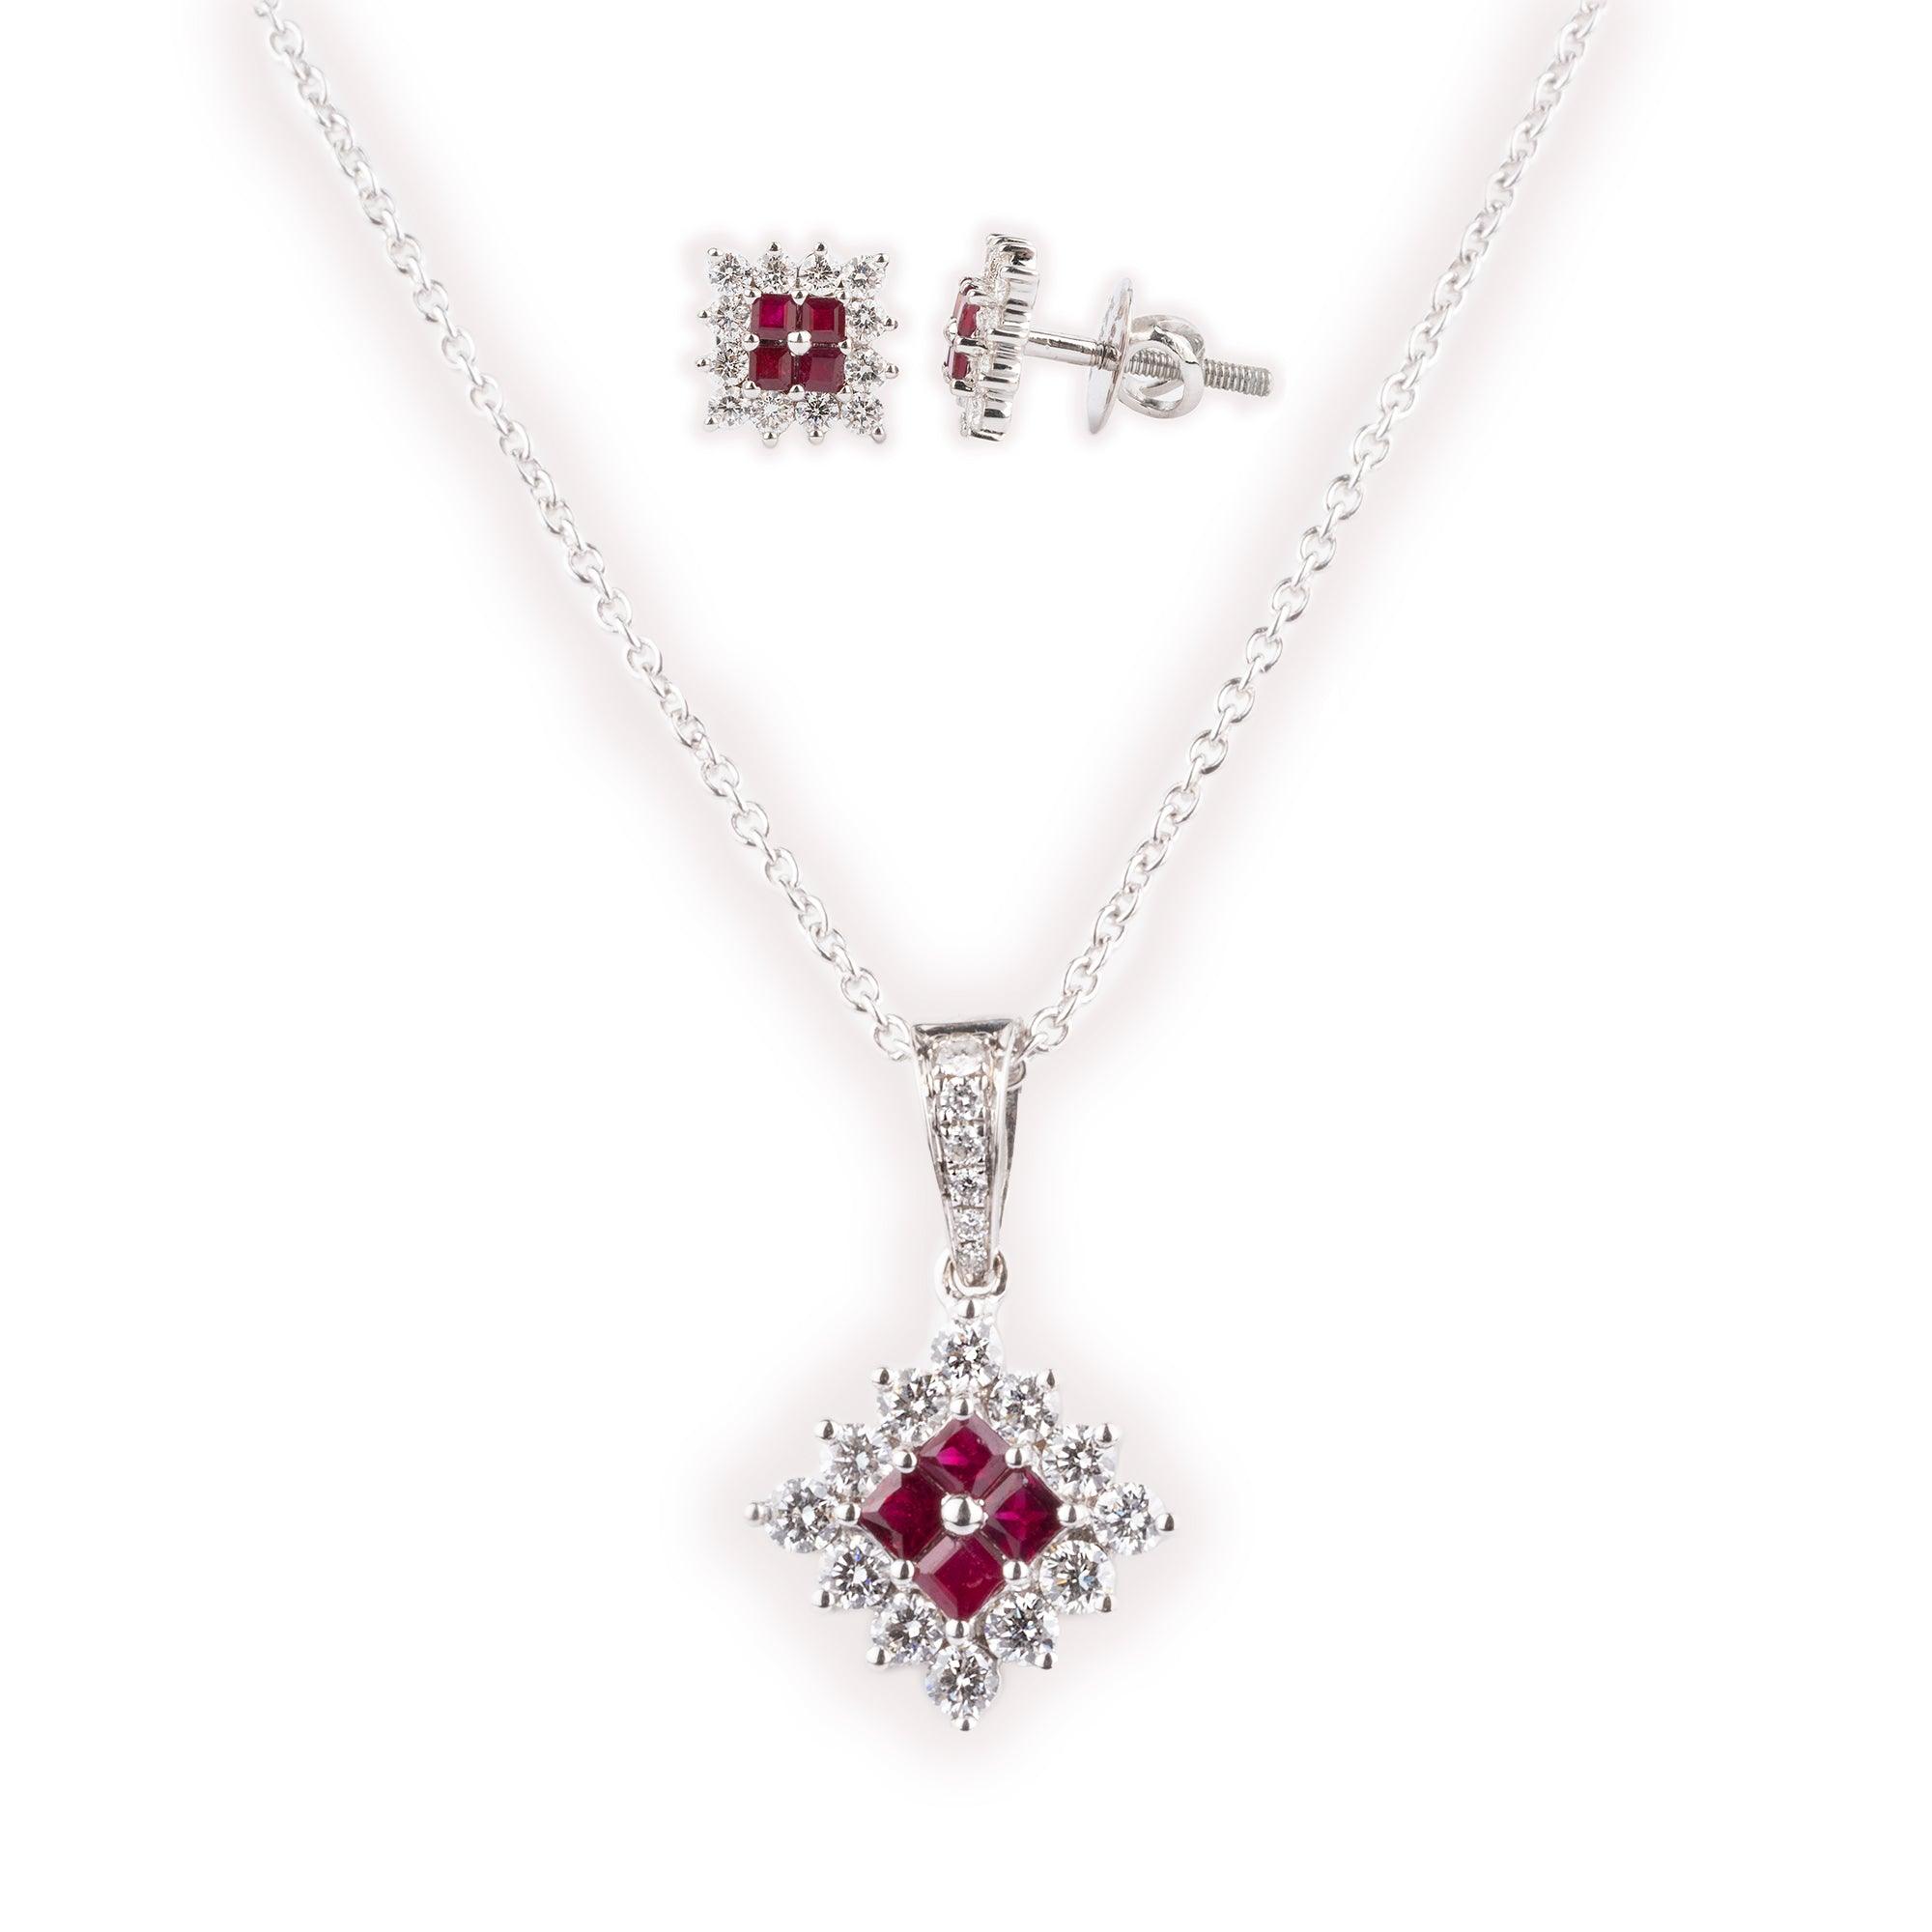 18ct White Gold Diamond & Ruby Chain, Pendant and Earrings Set CH11807-16 MCS2597 MCS2598 - Minar Jewellers